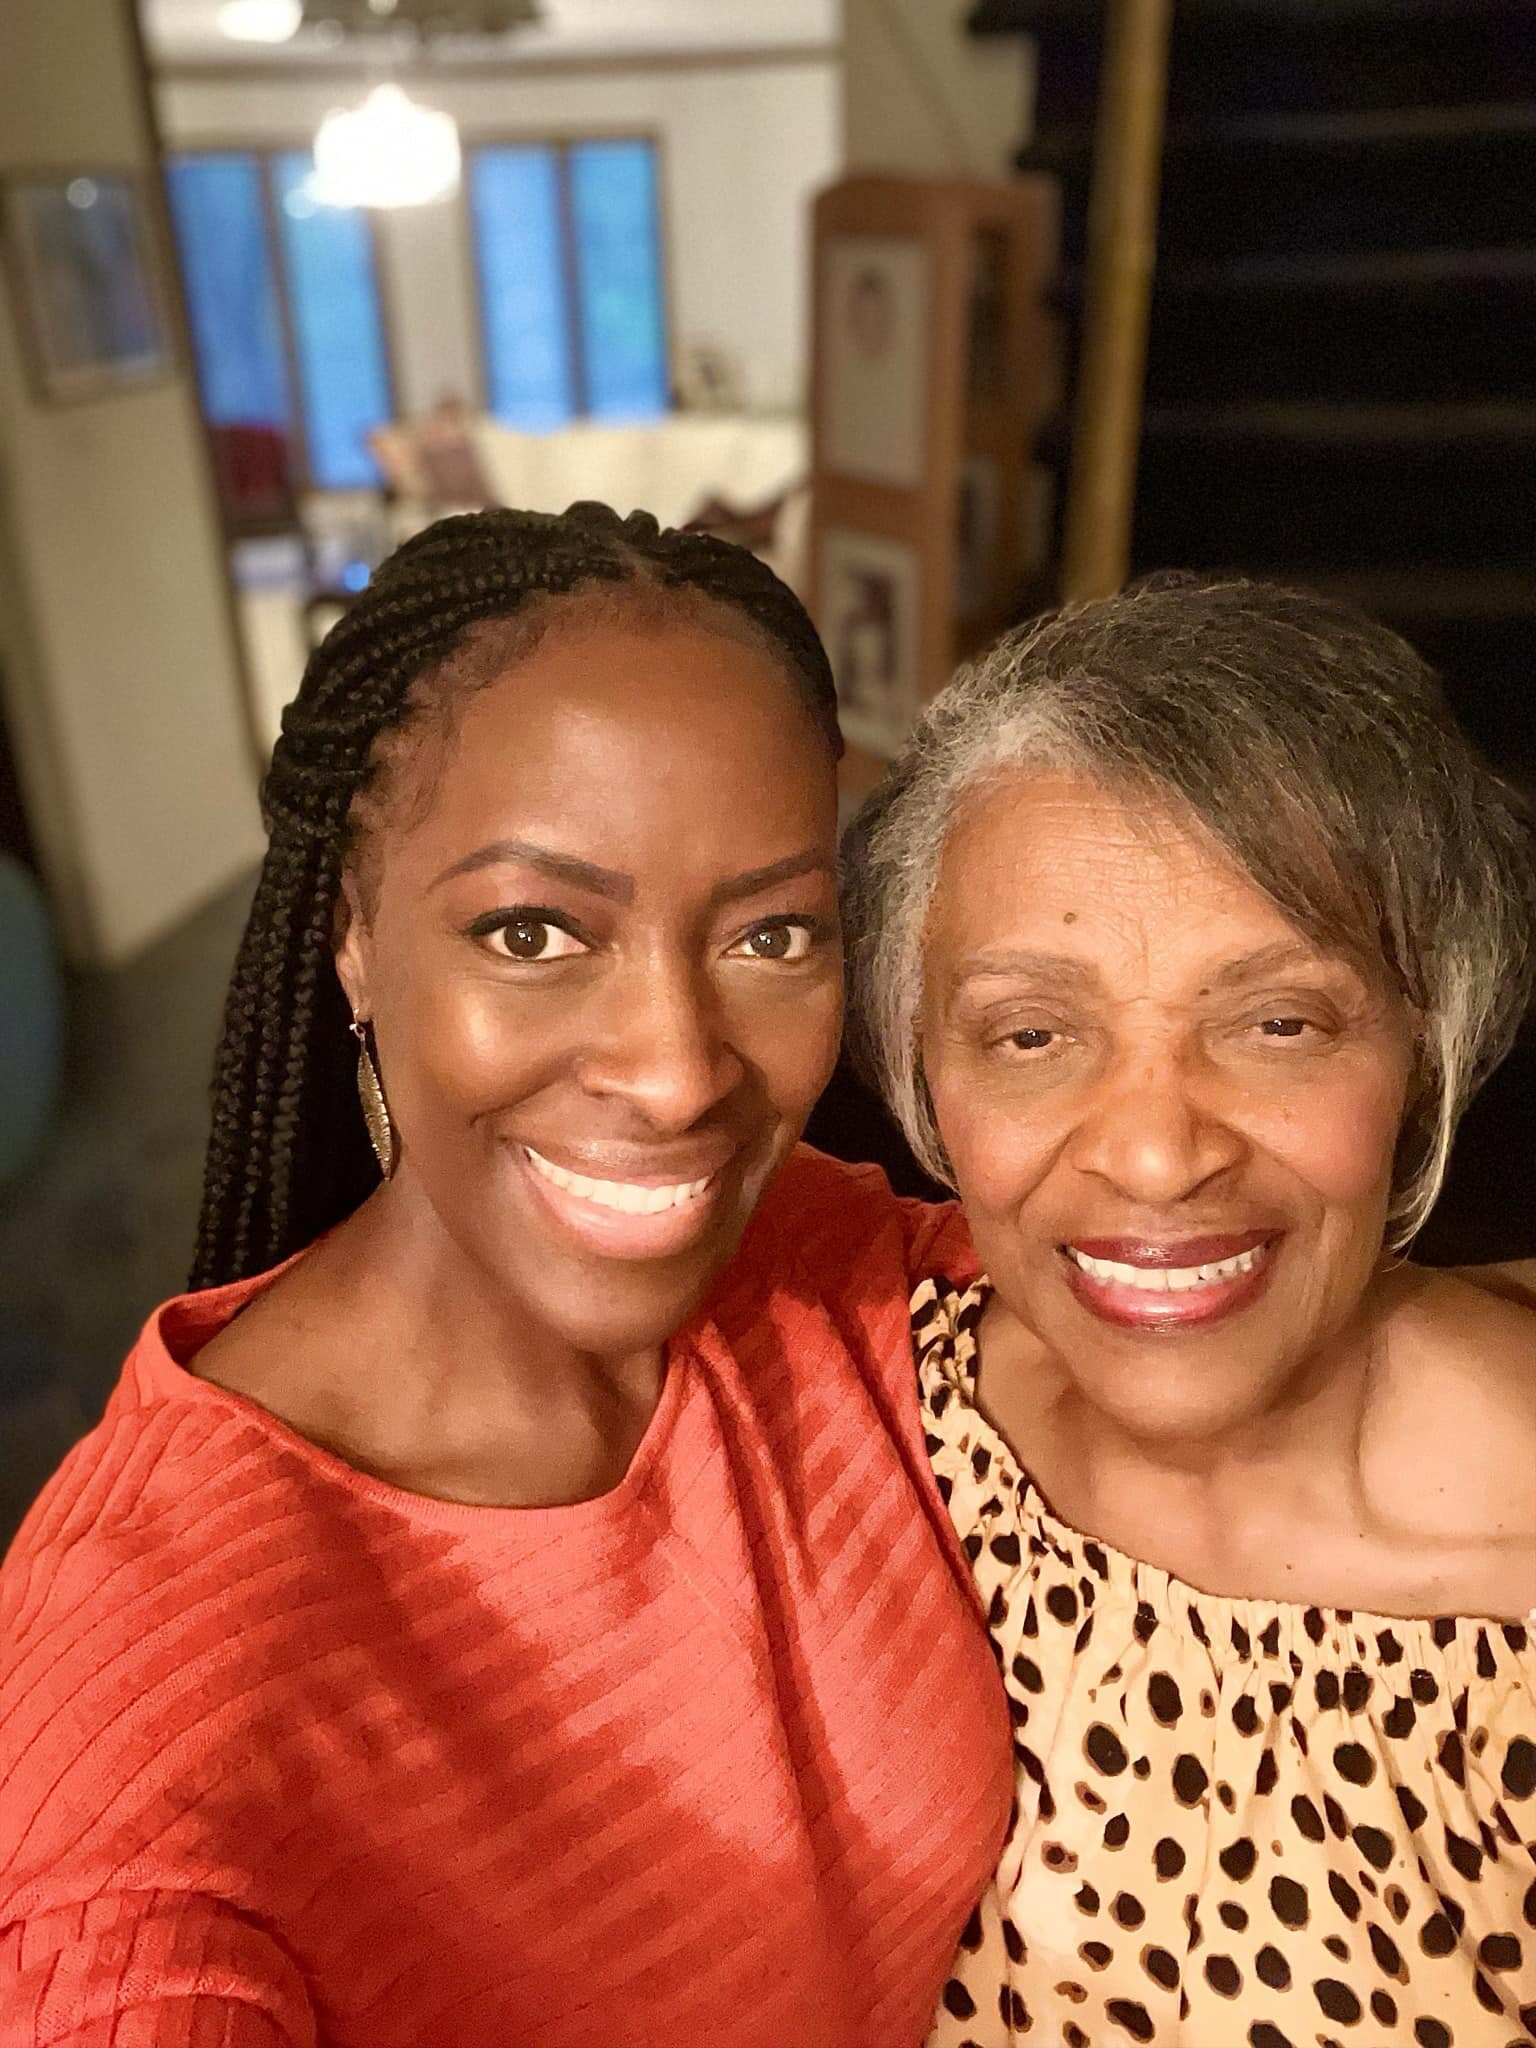 Happy Mother&rsquo;s Day to the one who taught me everything I know about being a lady. I love you, Mom! 🥰🥰 Have a wonderful weekend celebrating and being celebrated! 🎉🥂🎁❤️
#mydayone
#mablemaybelle
#mymommy